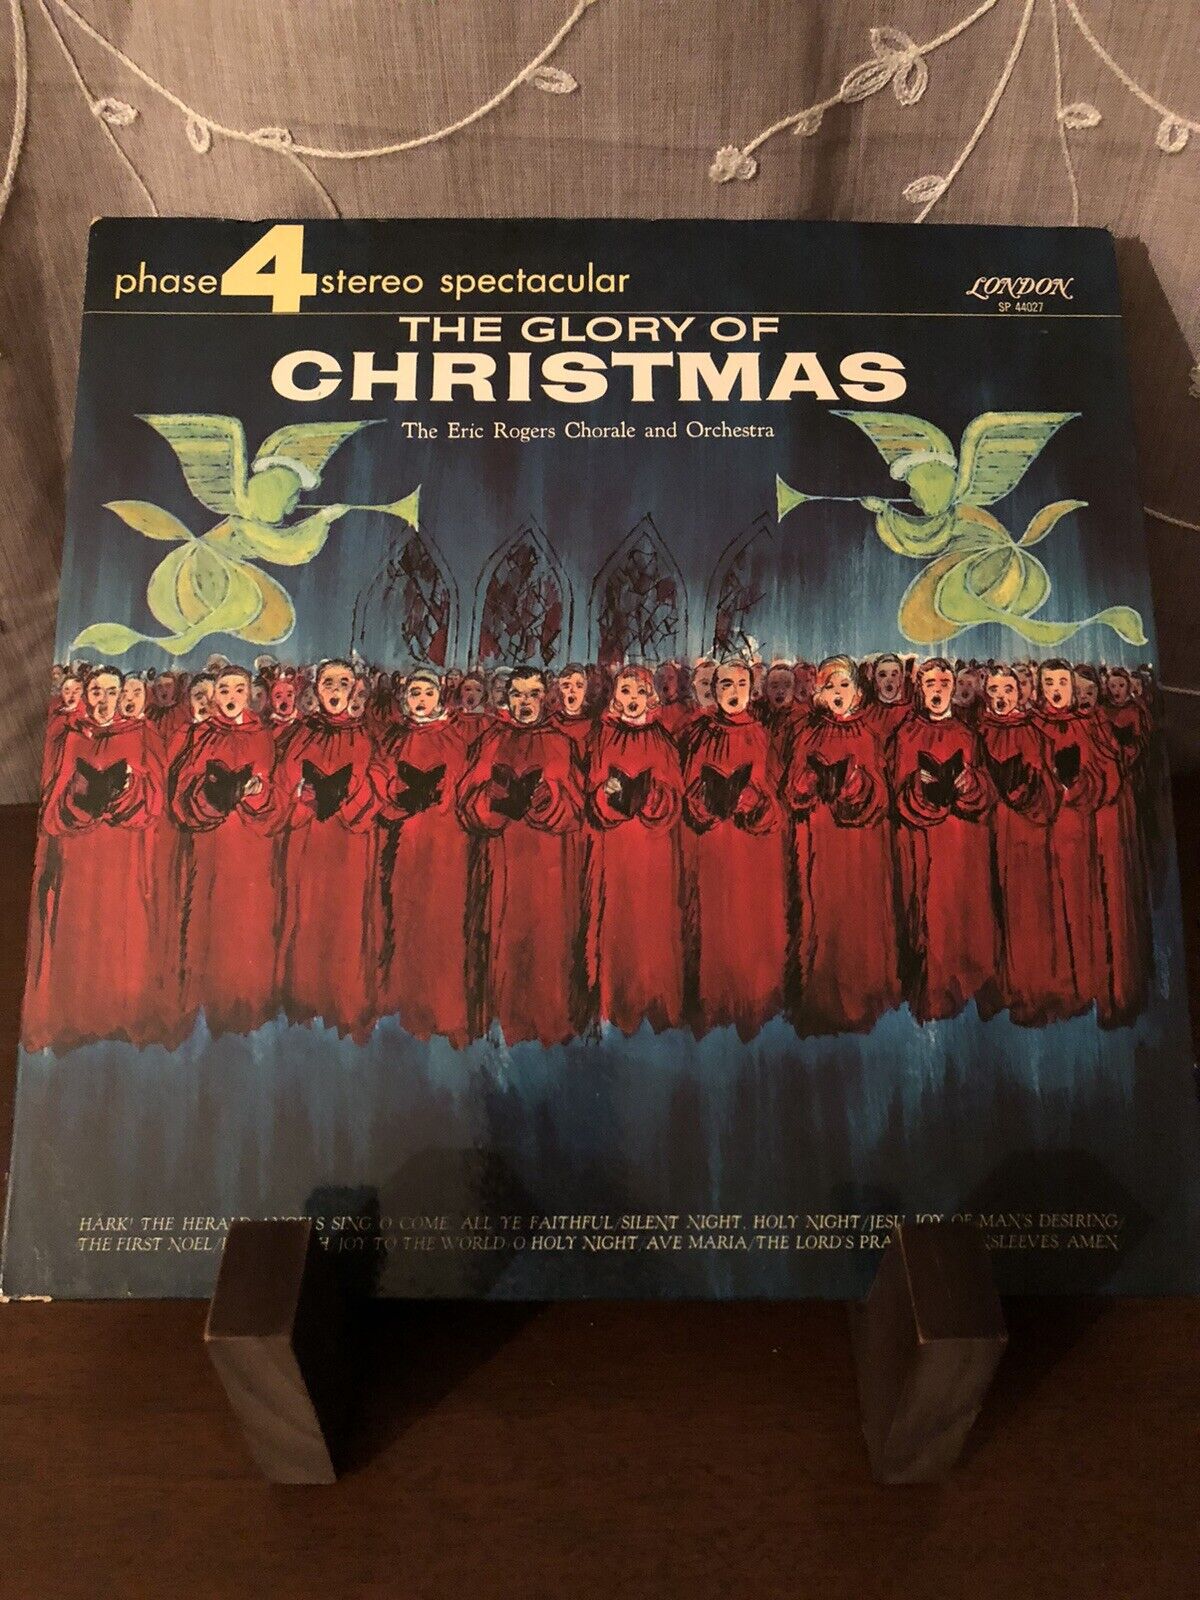 ERIC ROGERS “THE GLORY OF CHRISTMAS” LONDON SP 44027 (1963)